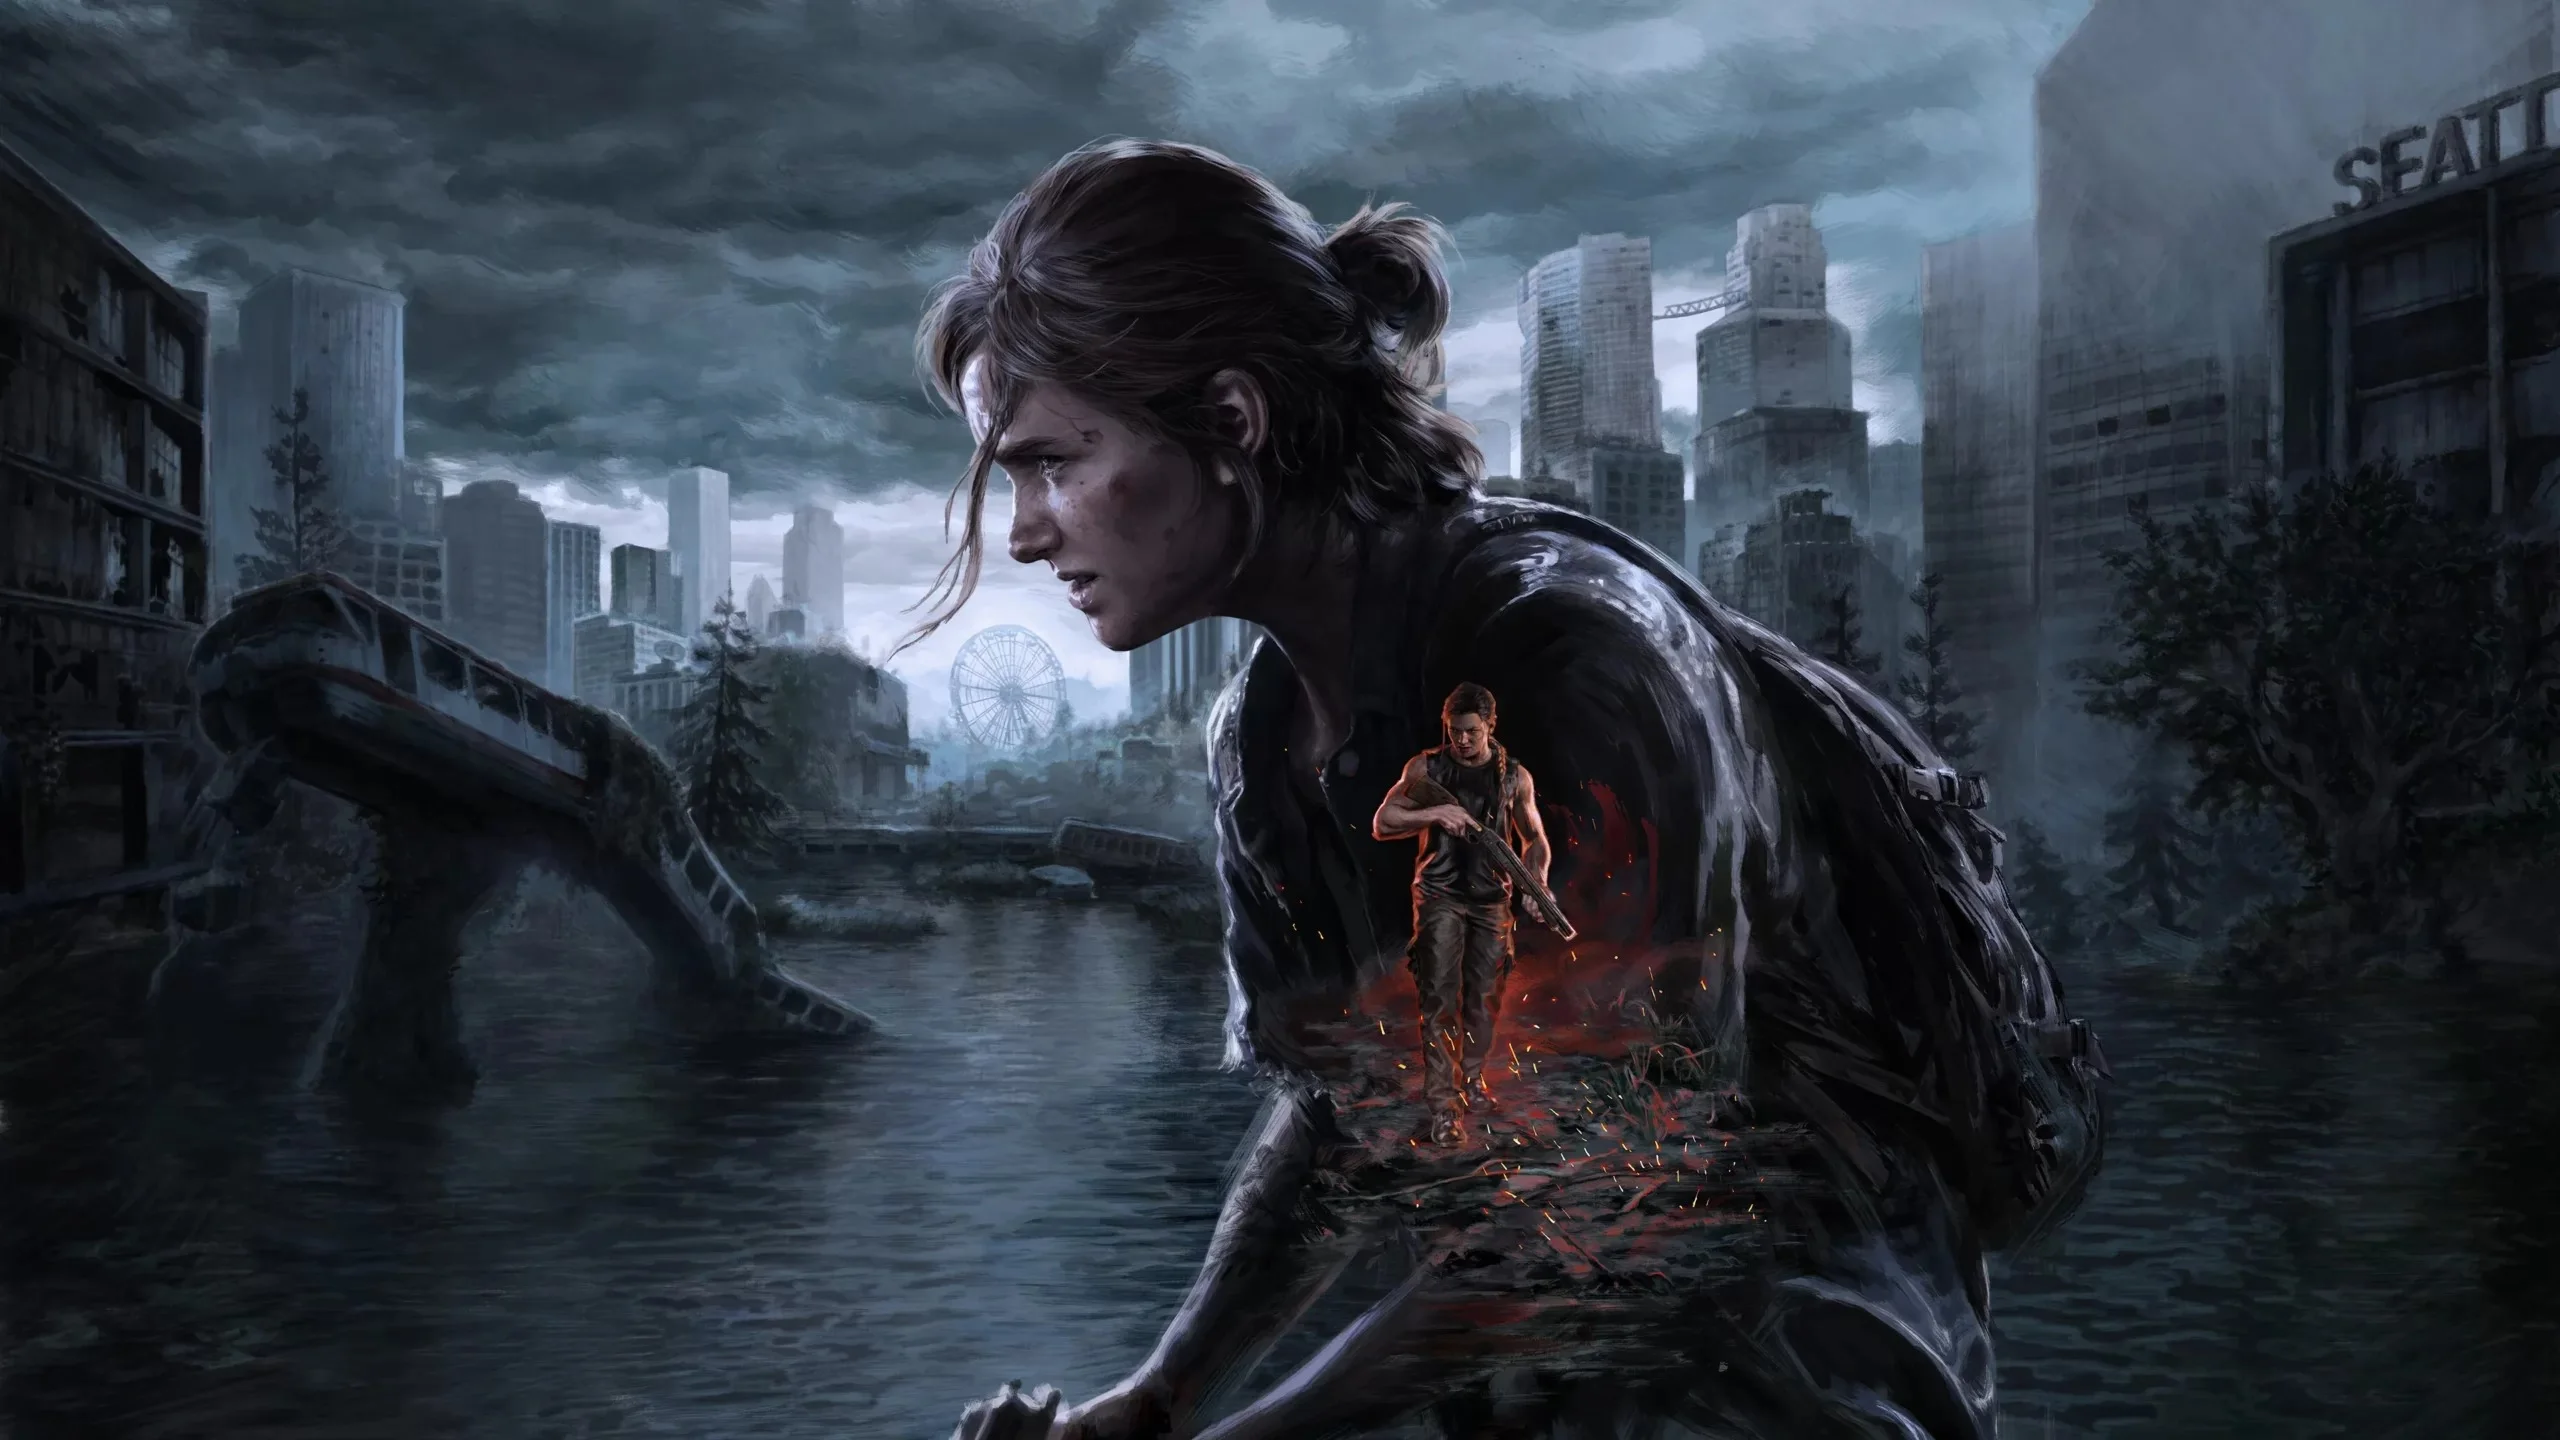 The third part of The Last of Us is in development